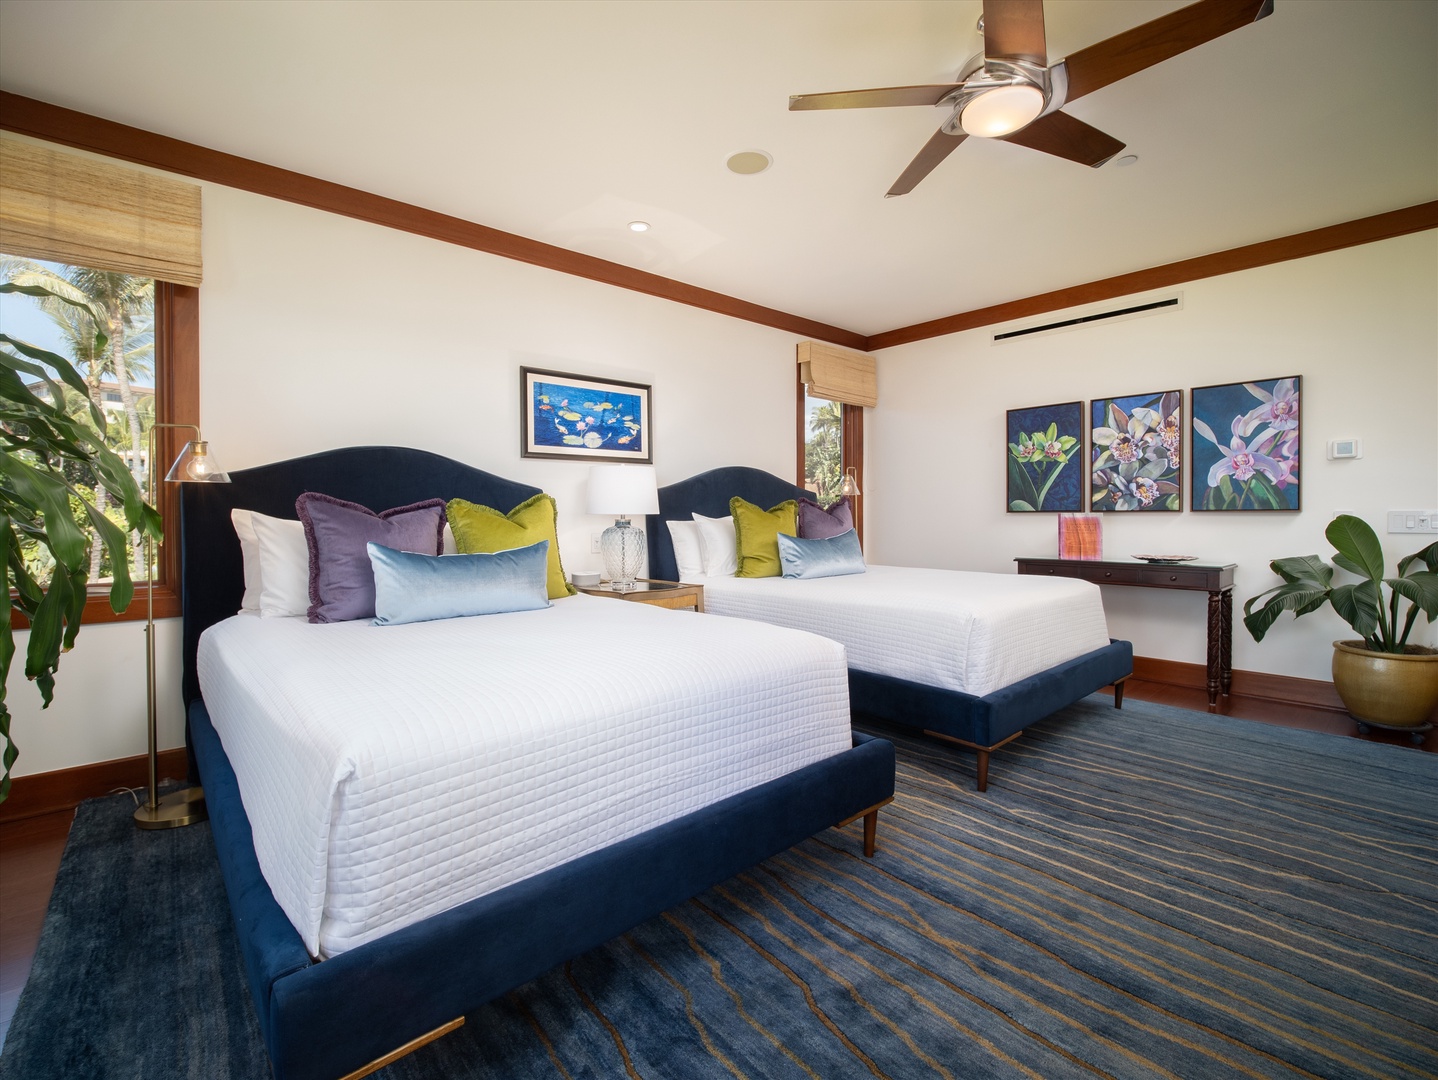 Wailea Vacation Rentals, Royal Ilima A201 at Wailea Beach Villas* - Third Bedroom Suite with Two Queen Beds